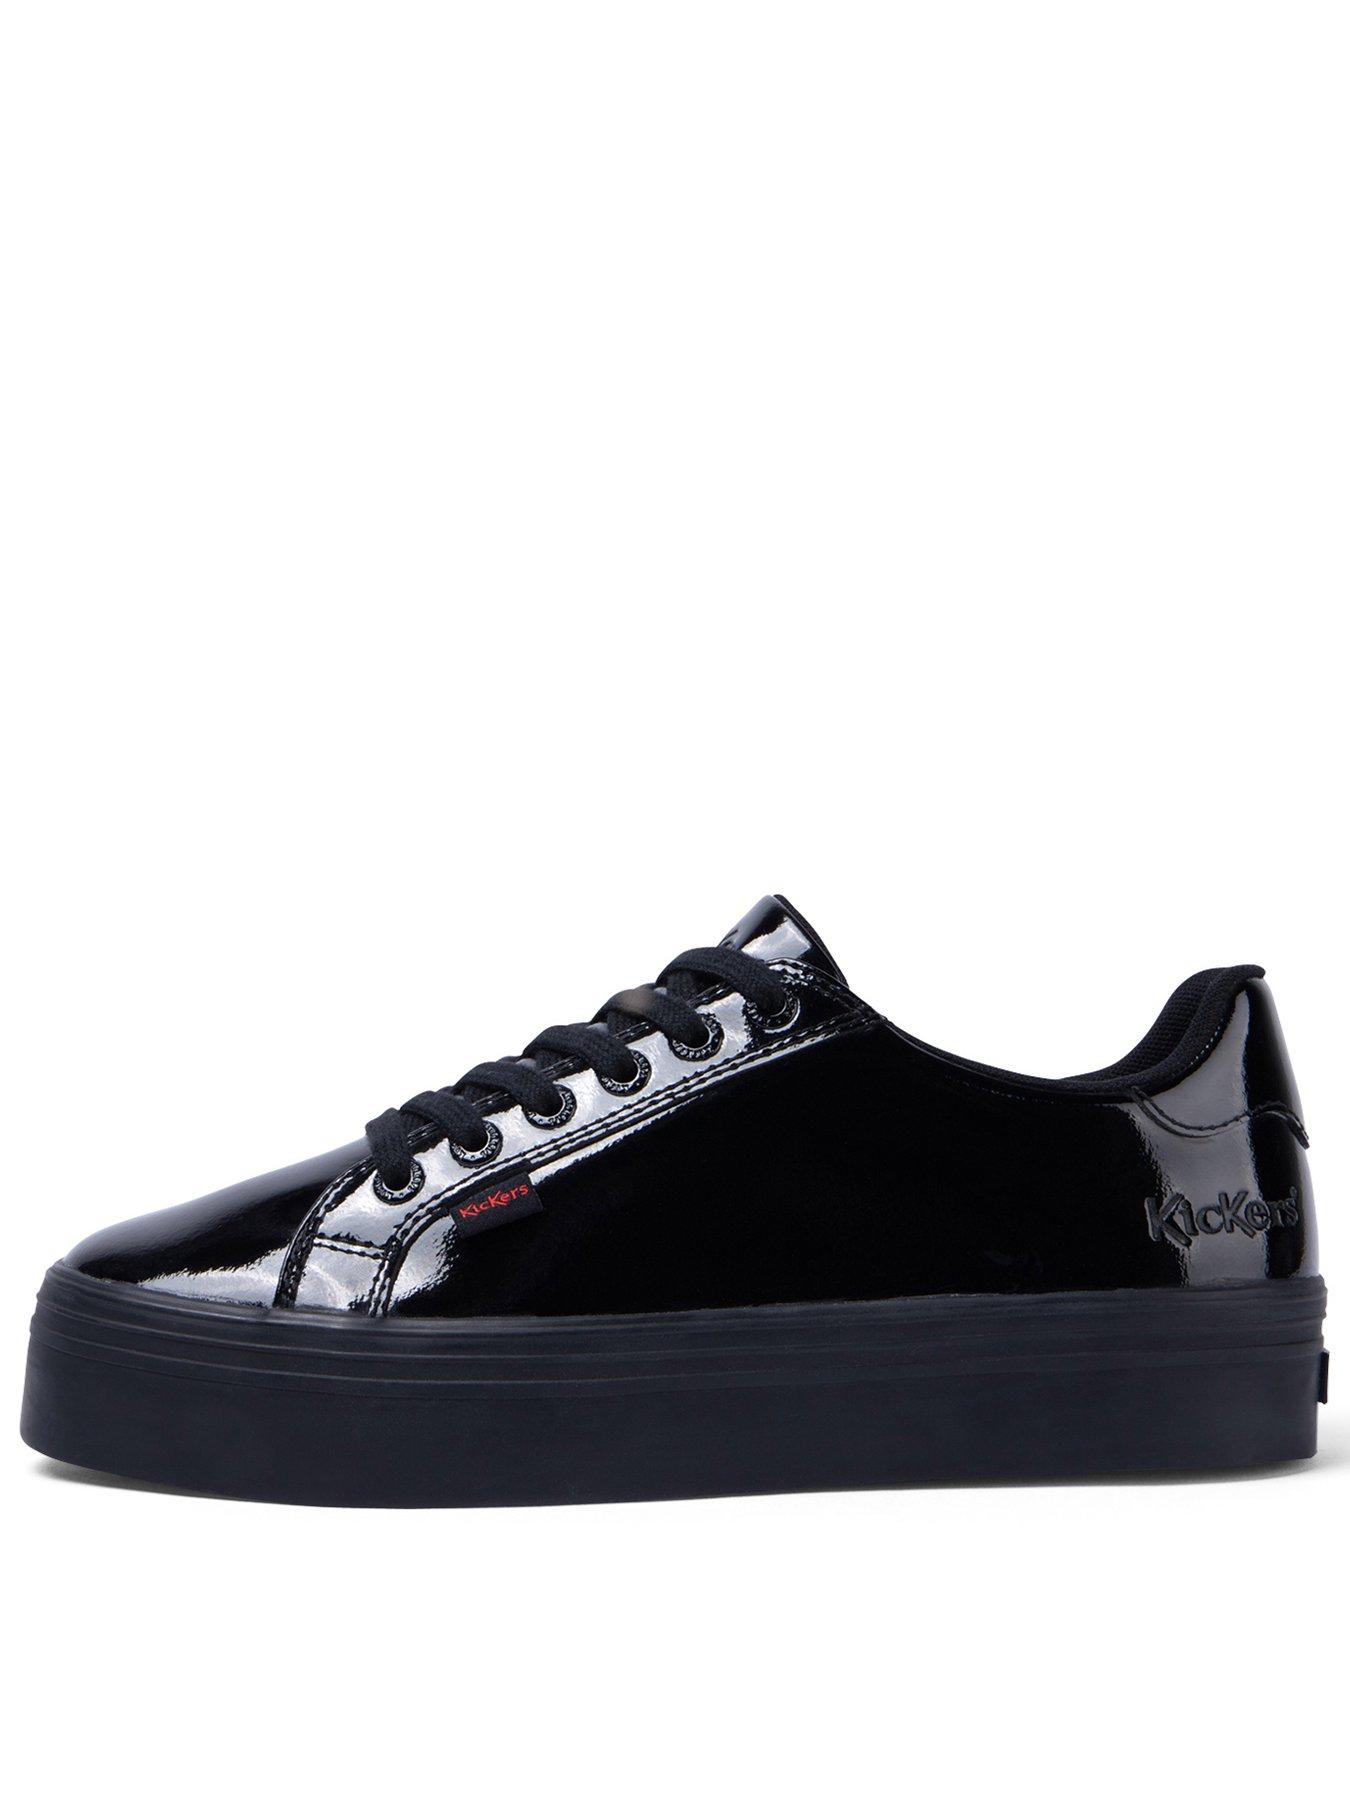 Trainers Tovni Stack Patent Leather Trainer - Black